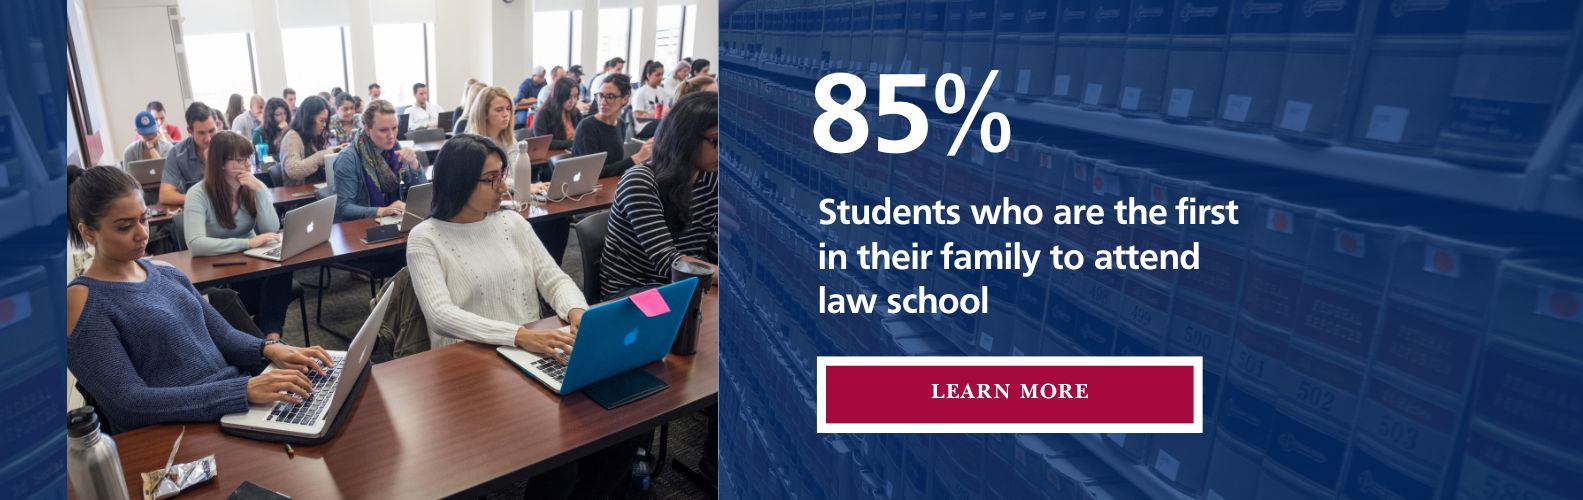 85 percent of students are the first in their family to graduate from law school